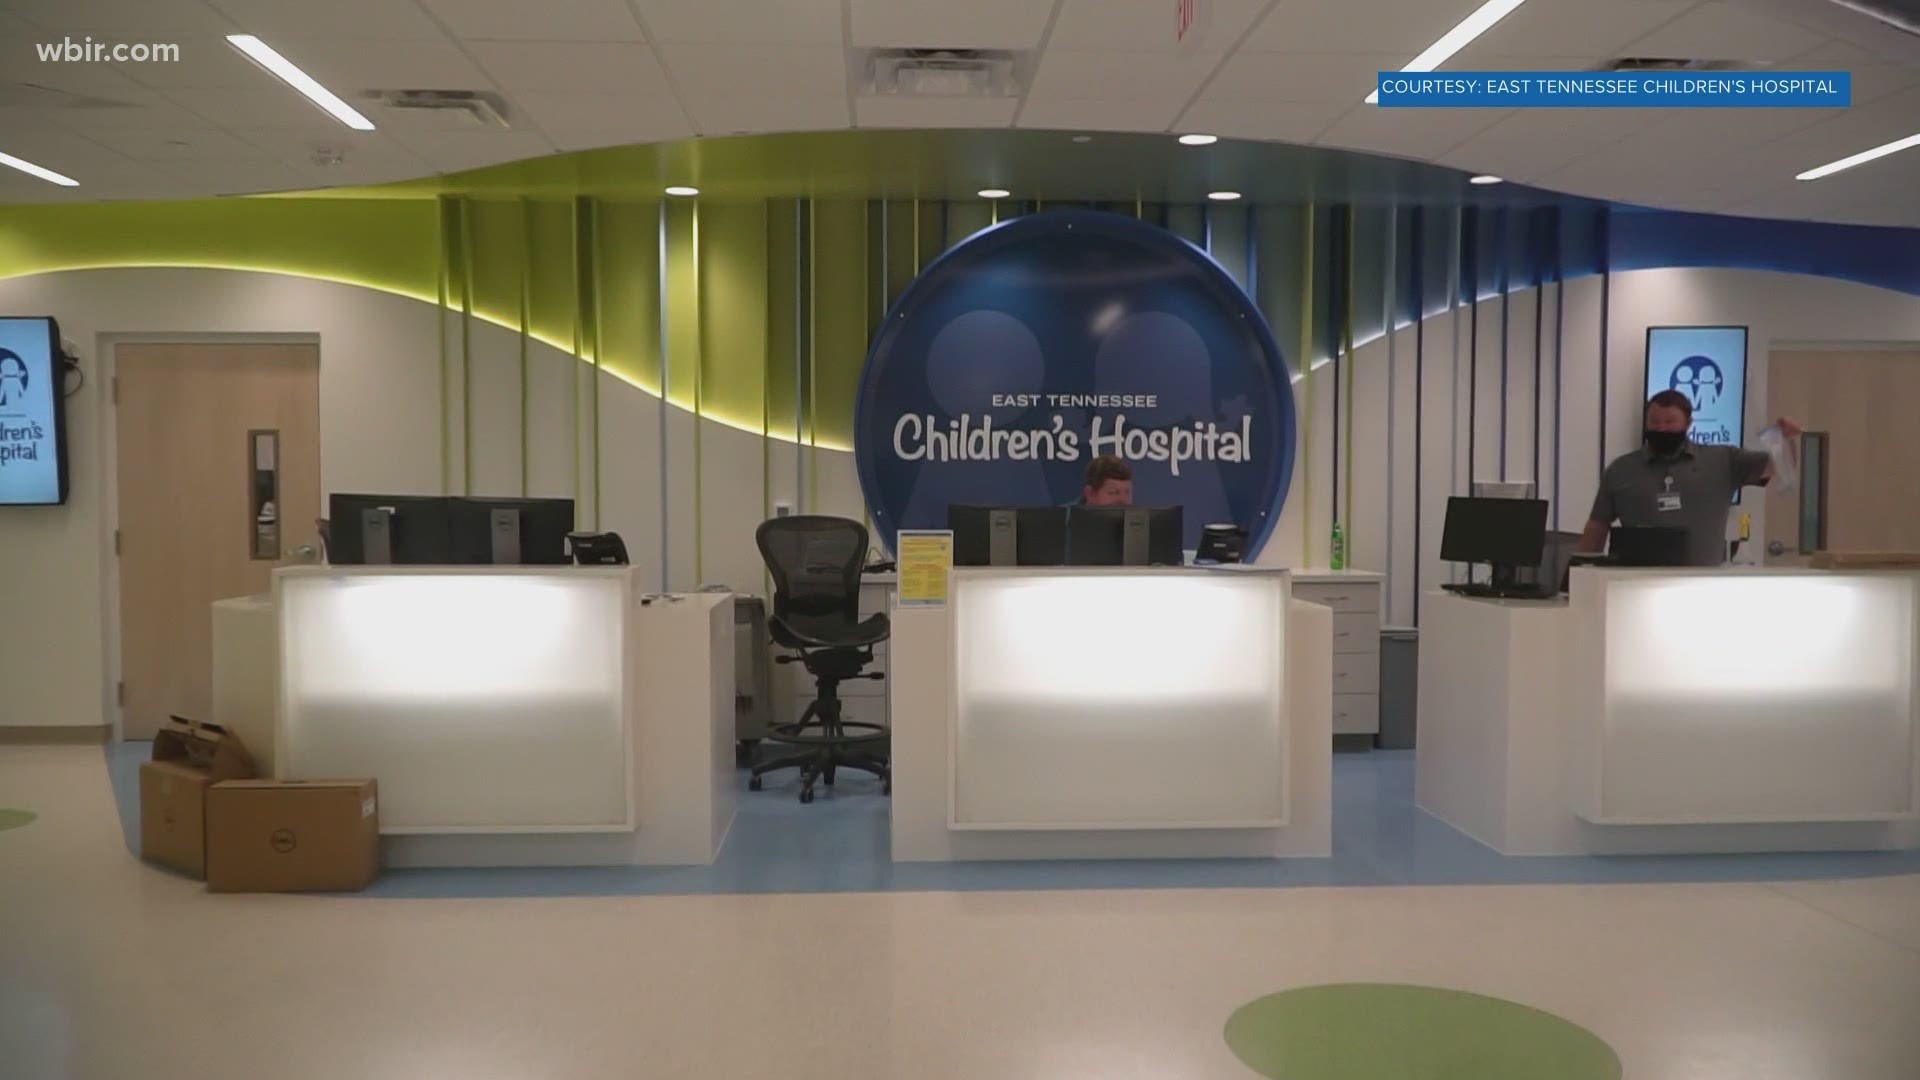 The East Tennessee Children's Hospital is showing off renovations to its emergency department lobby.